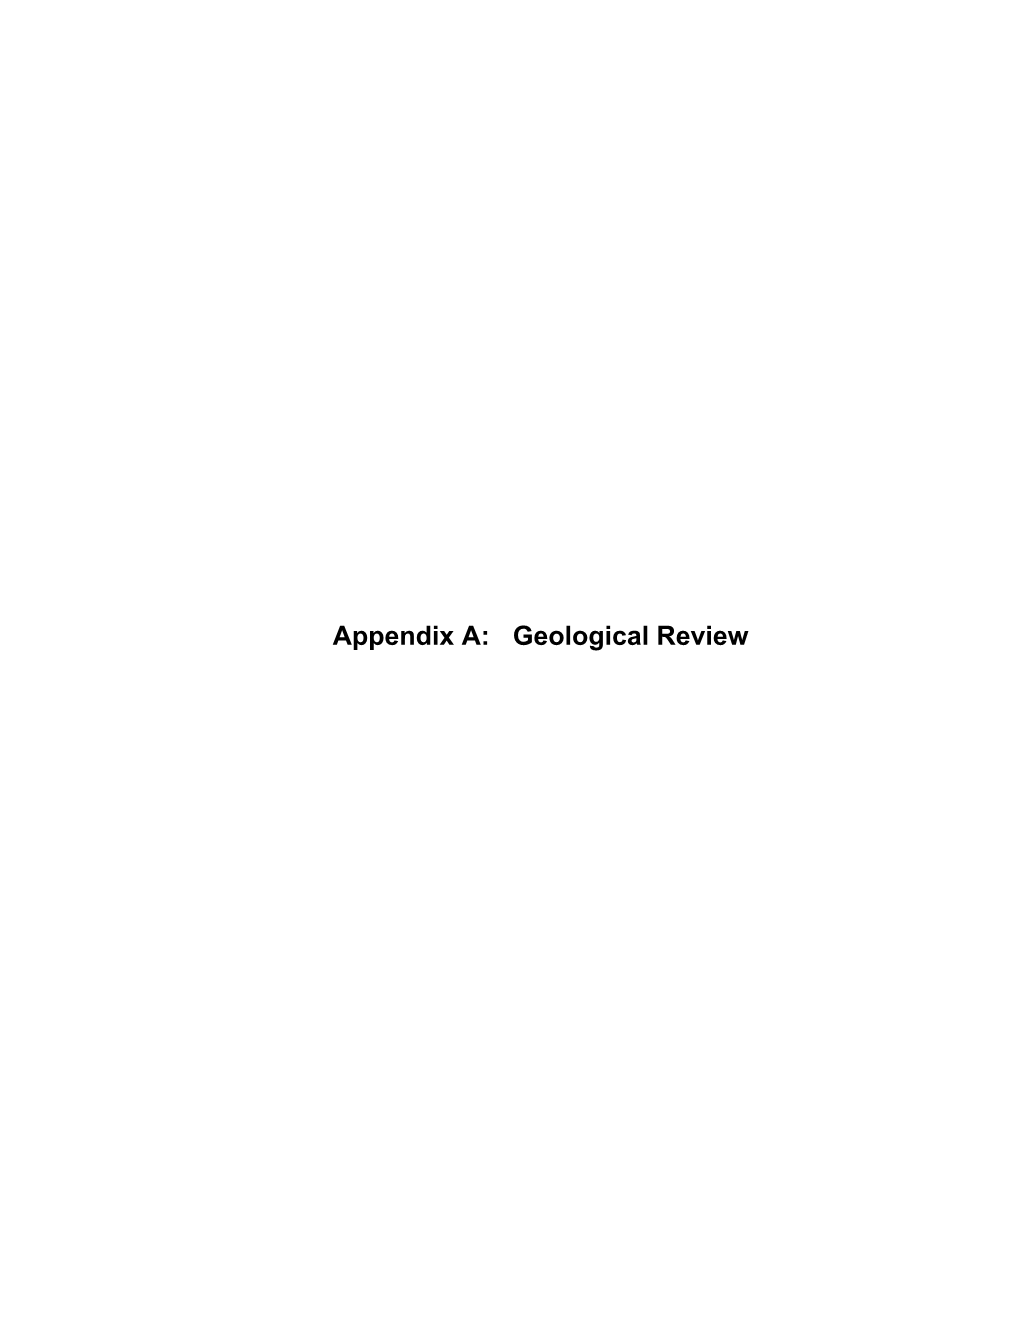 Appendix A: Geological Review